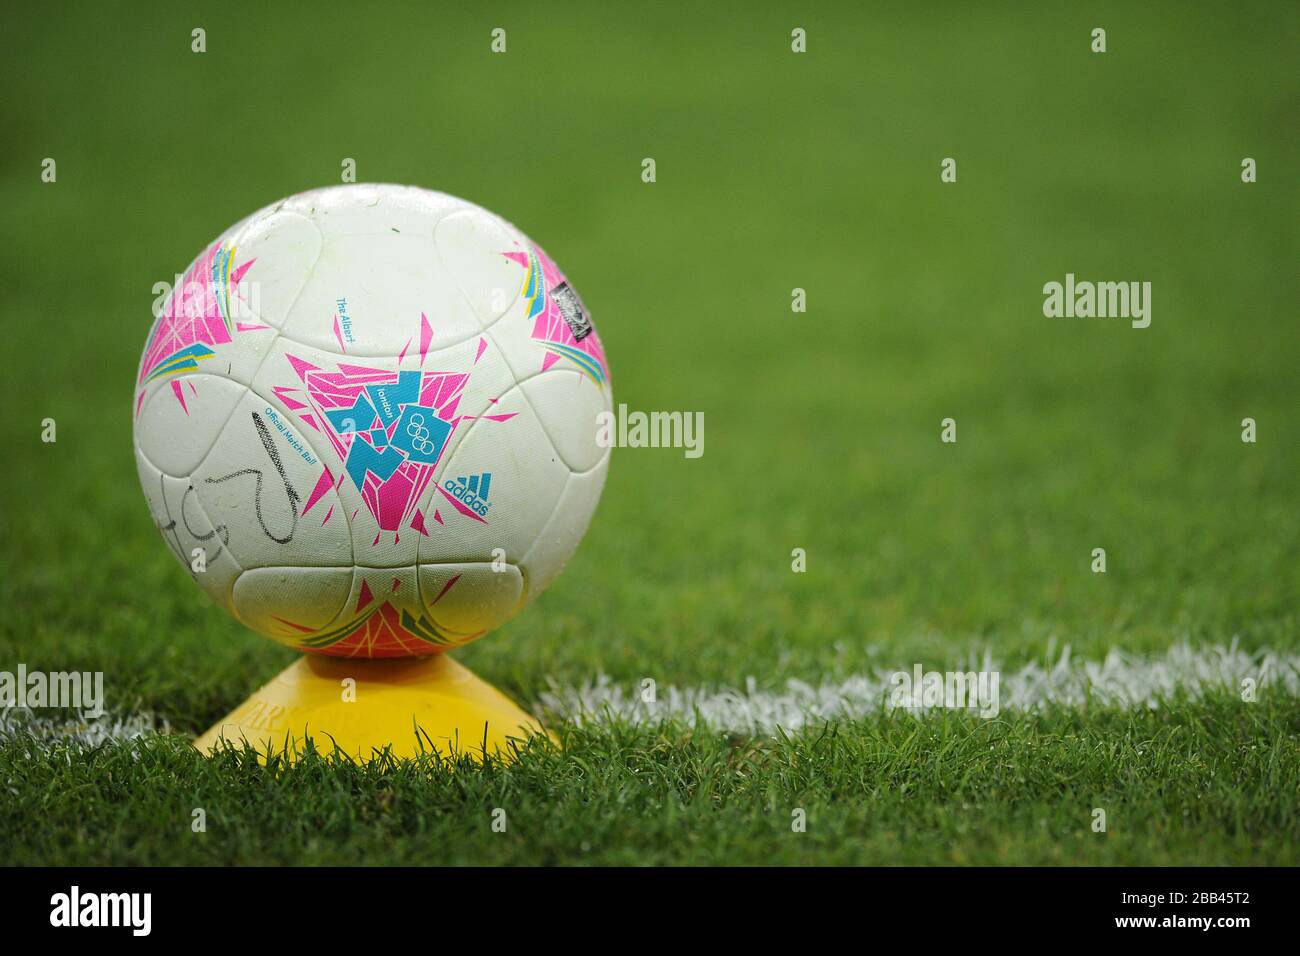 General view of an official Adidas Olympic football on a kicking tee Stock  Photo - Alamy